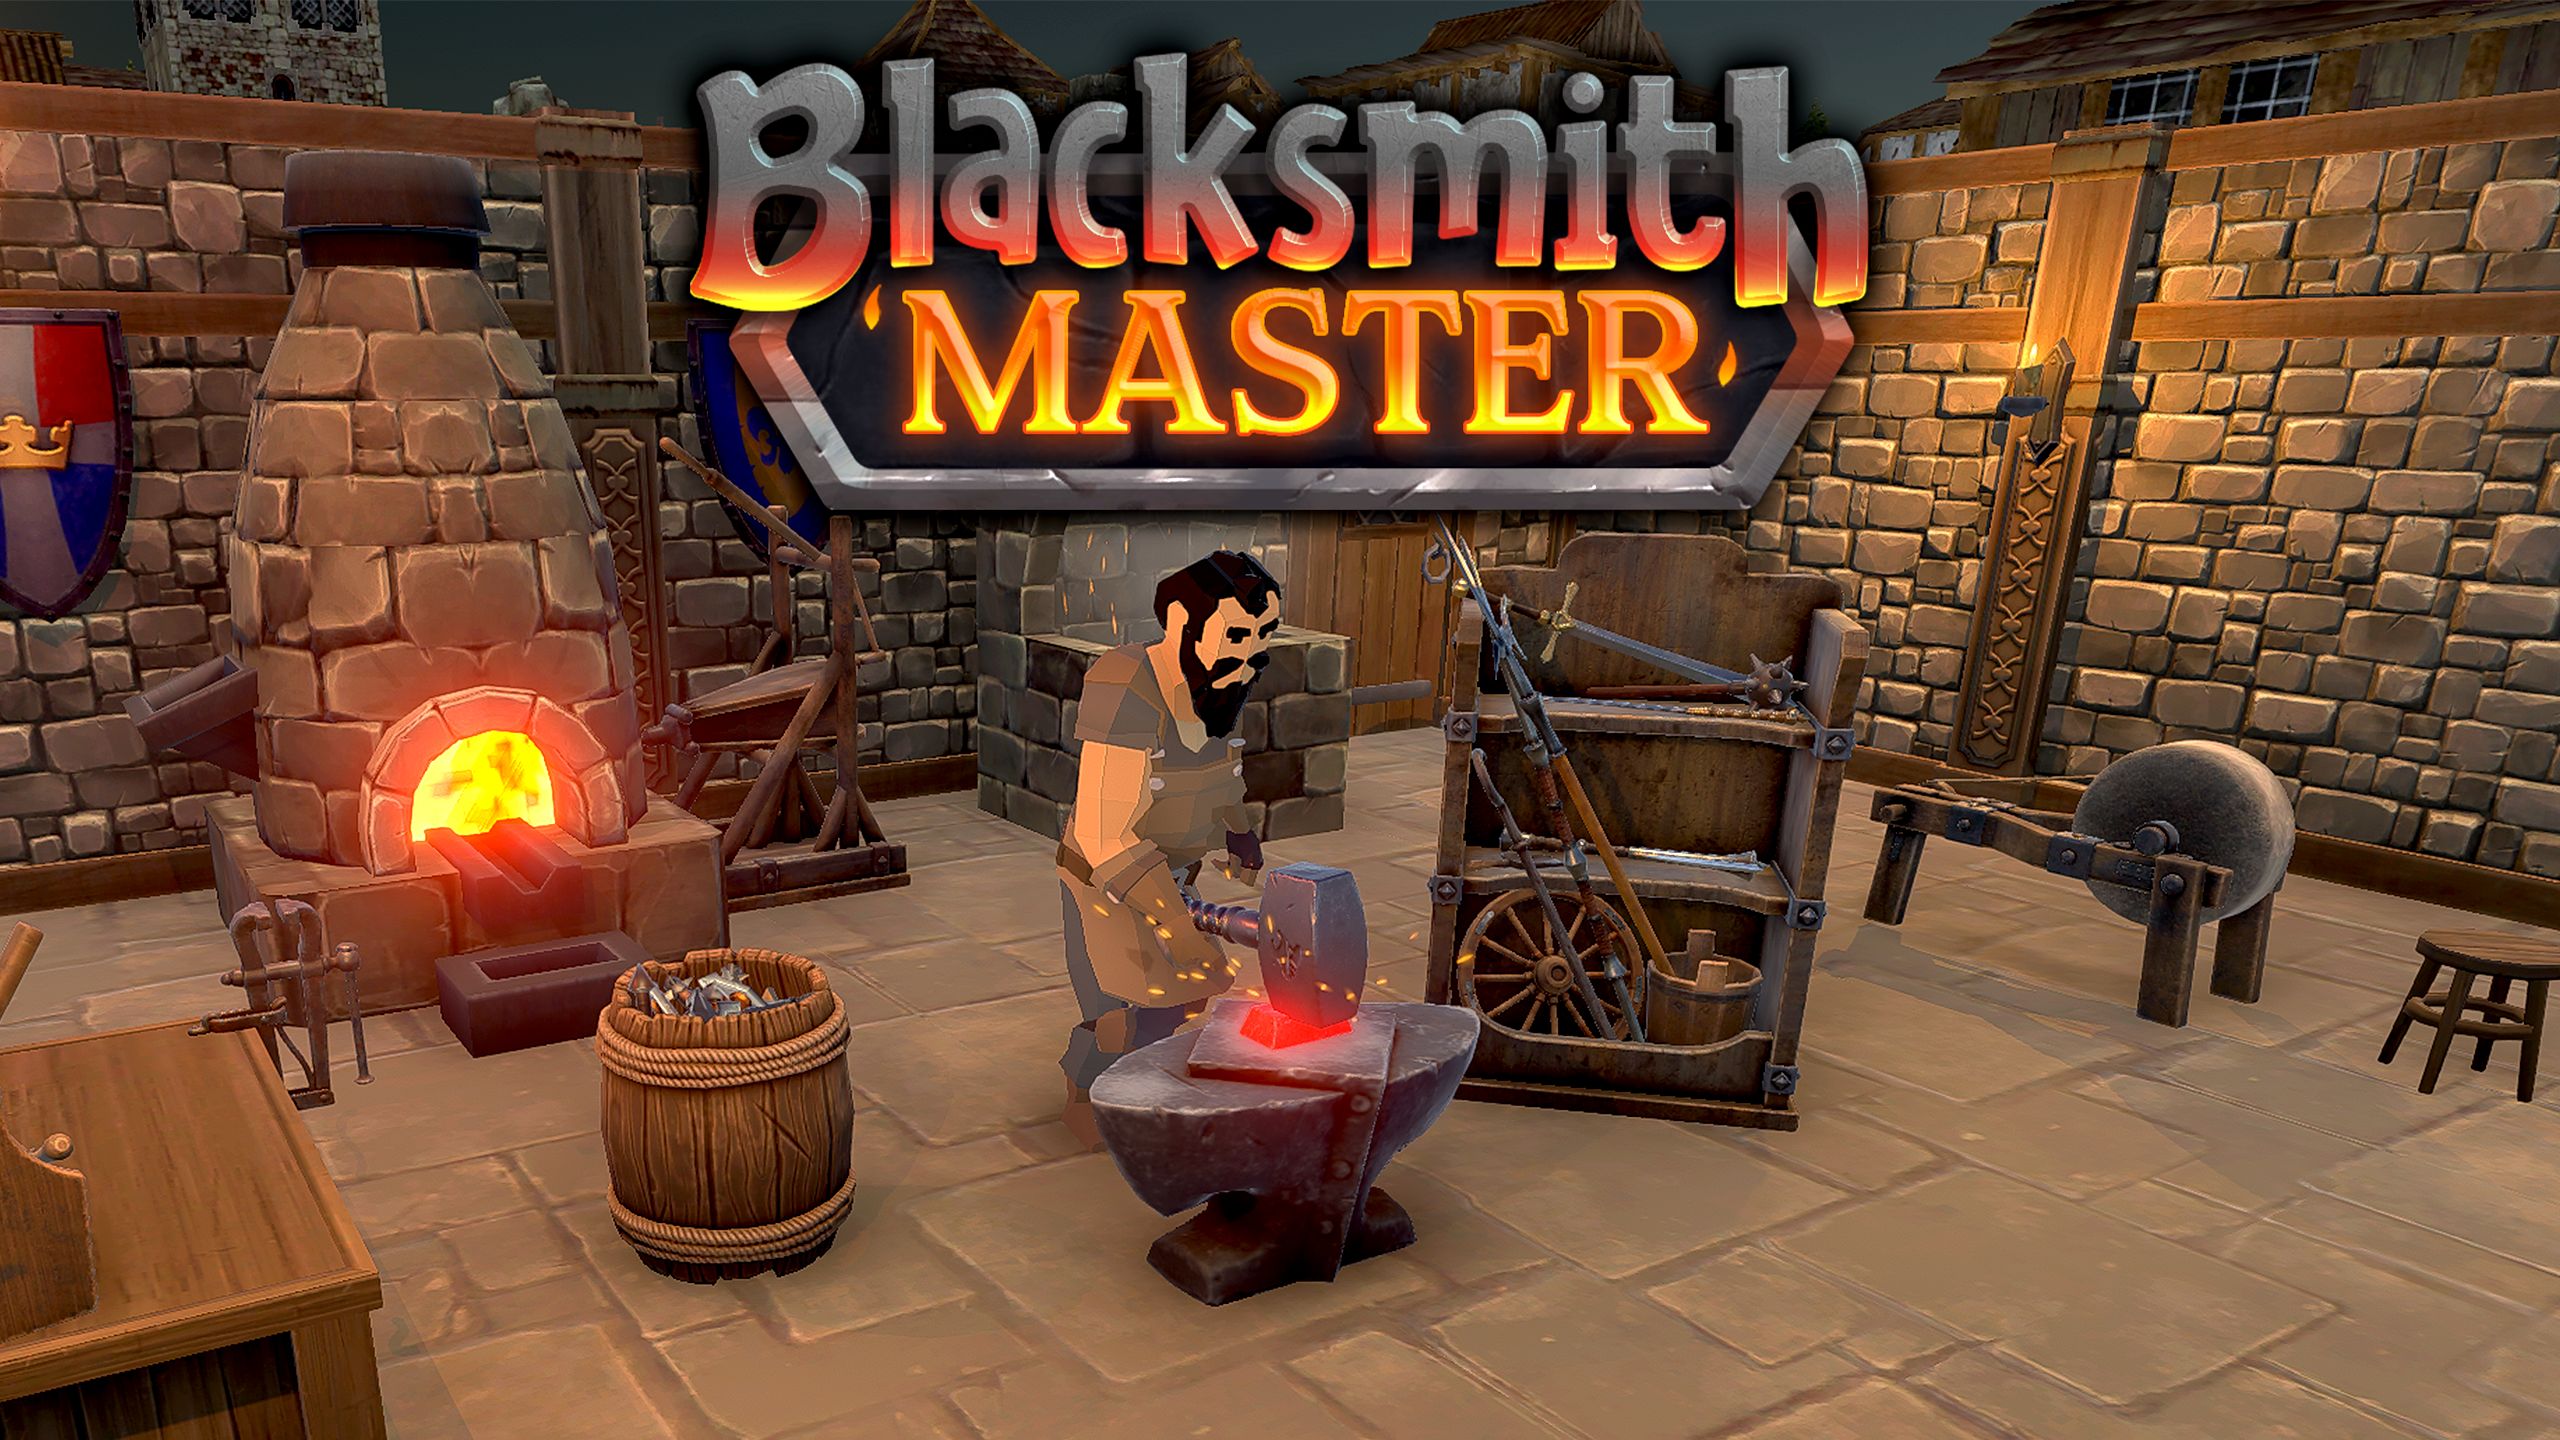 From ore mining to processing, designing and selling. “Blacksmith Master” simulation game to run a medieval blacksmith shop to be released in 2023